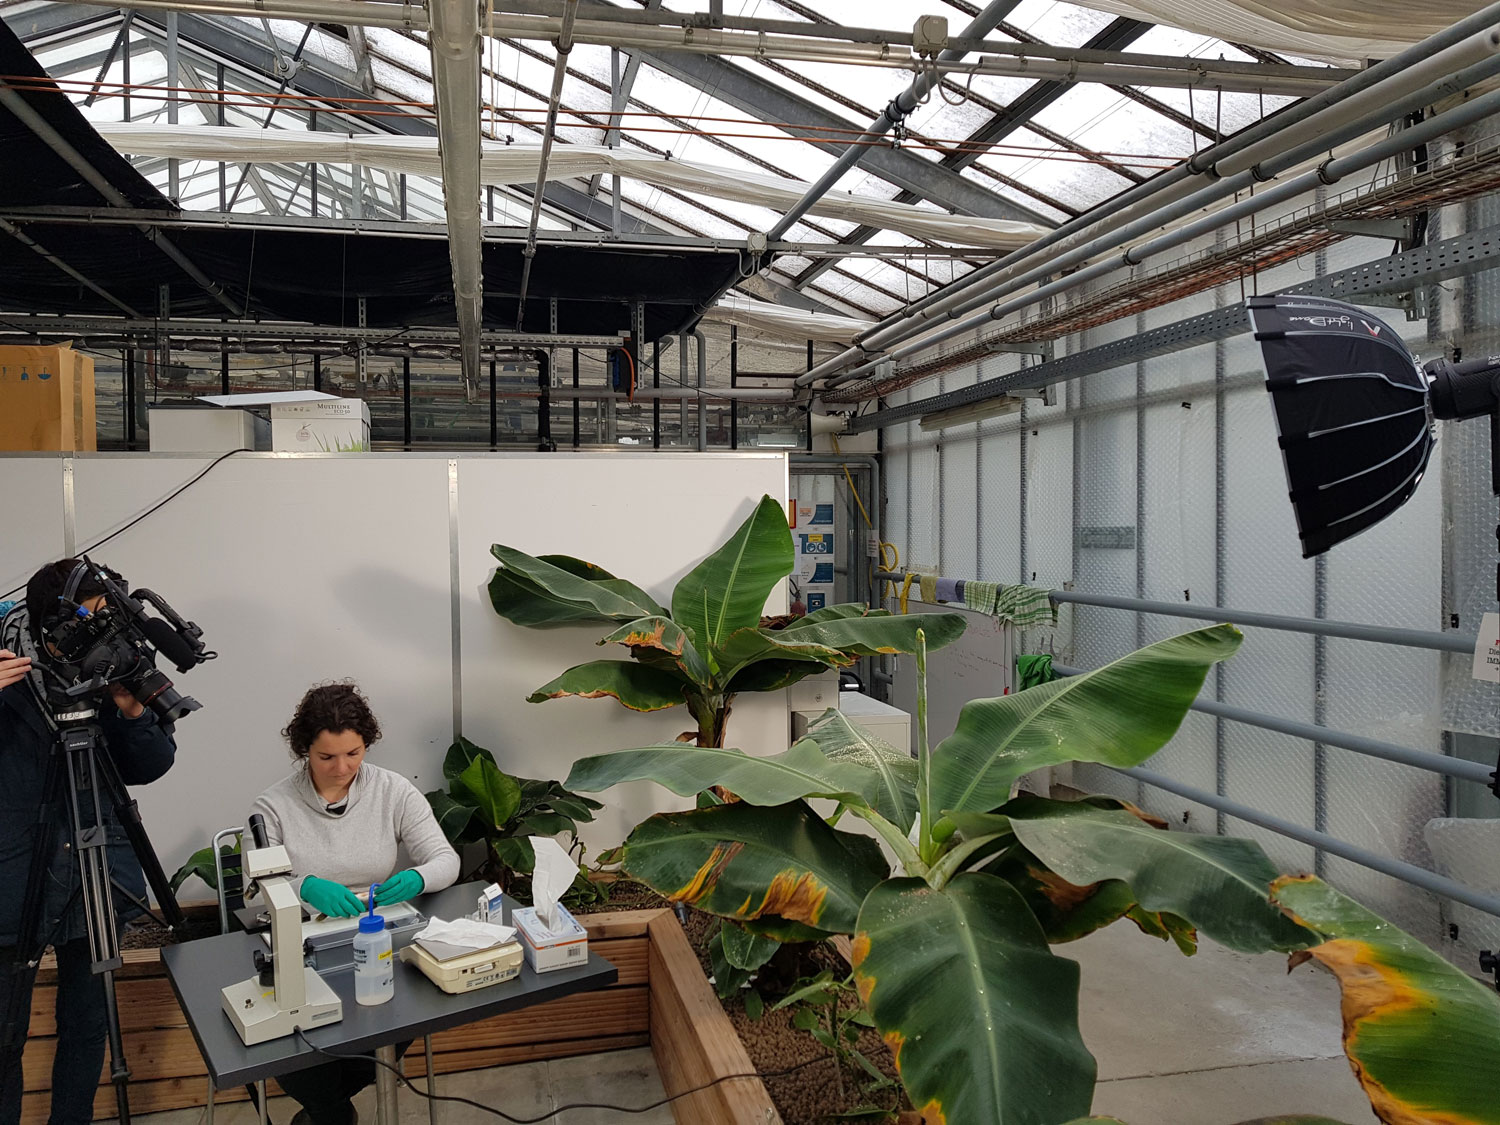 Filming for the MOOC Aquaponics in the aquaponics facilities of the ZHAW